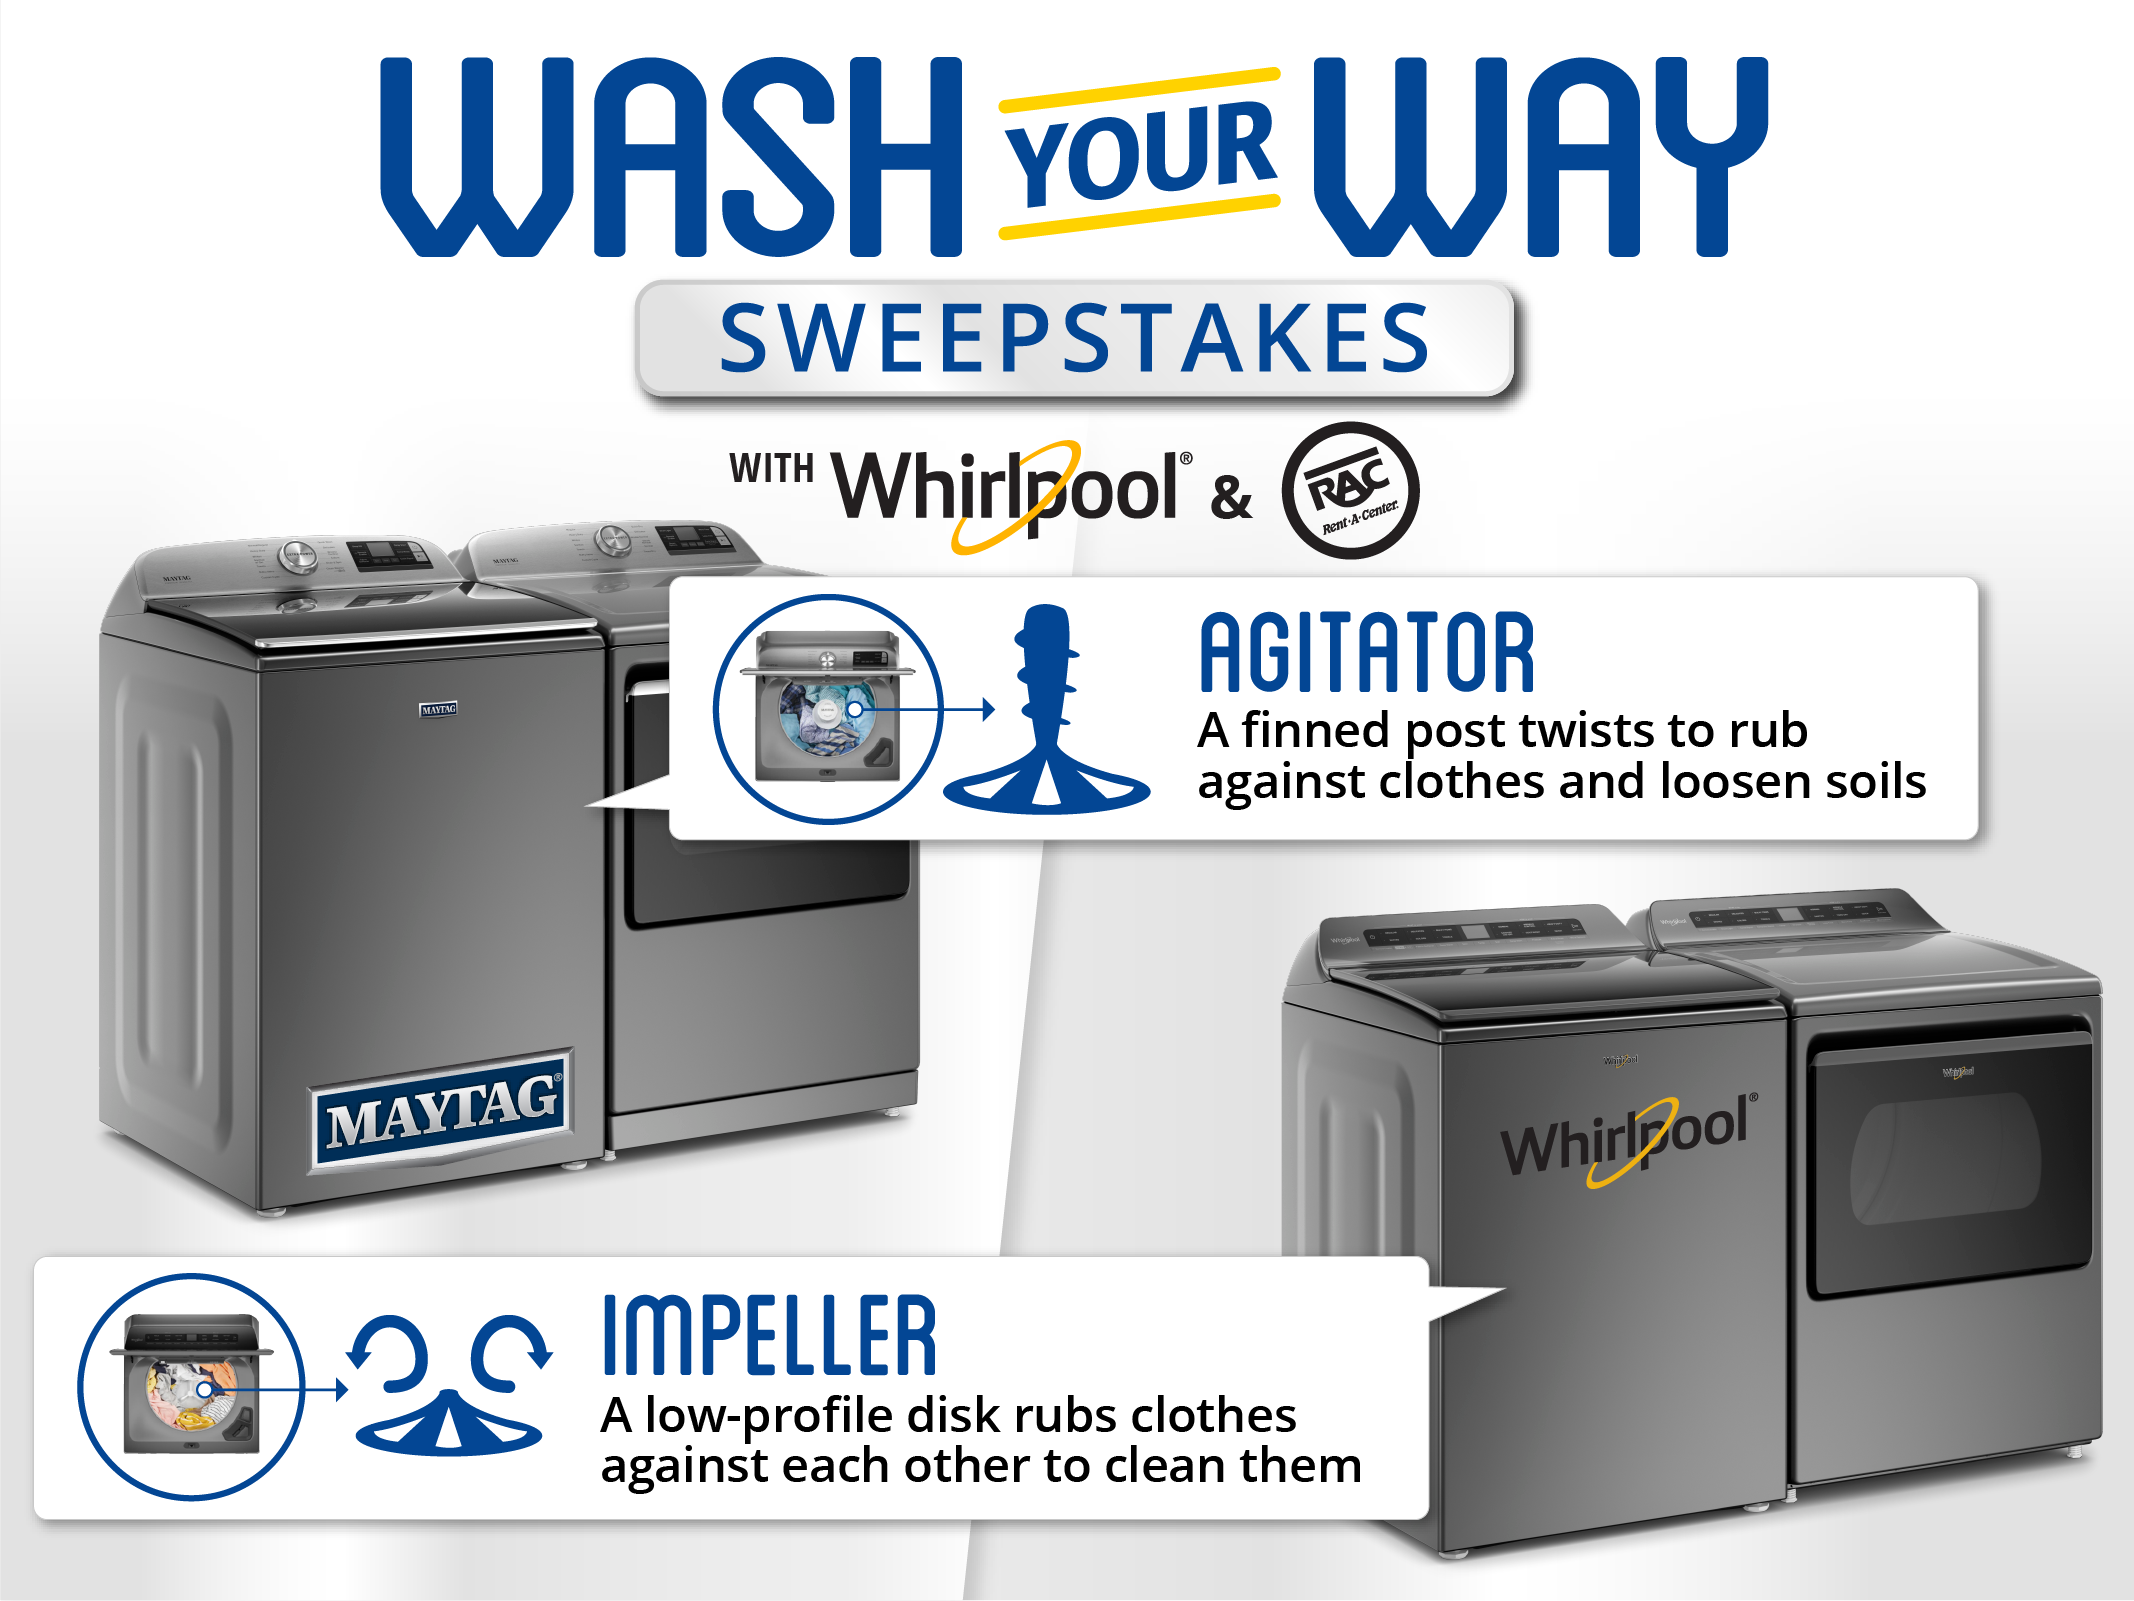 Wash Your Way Sweepstakes with Whirlpool and Rent-A-Center